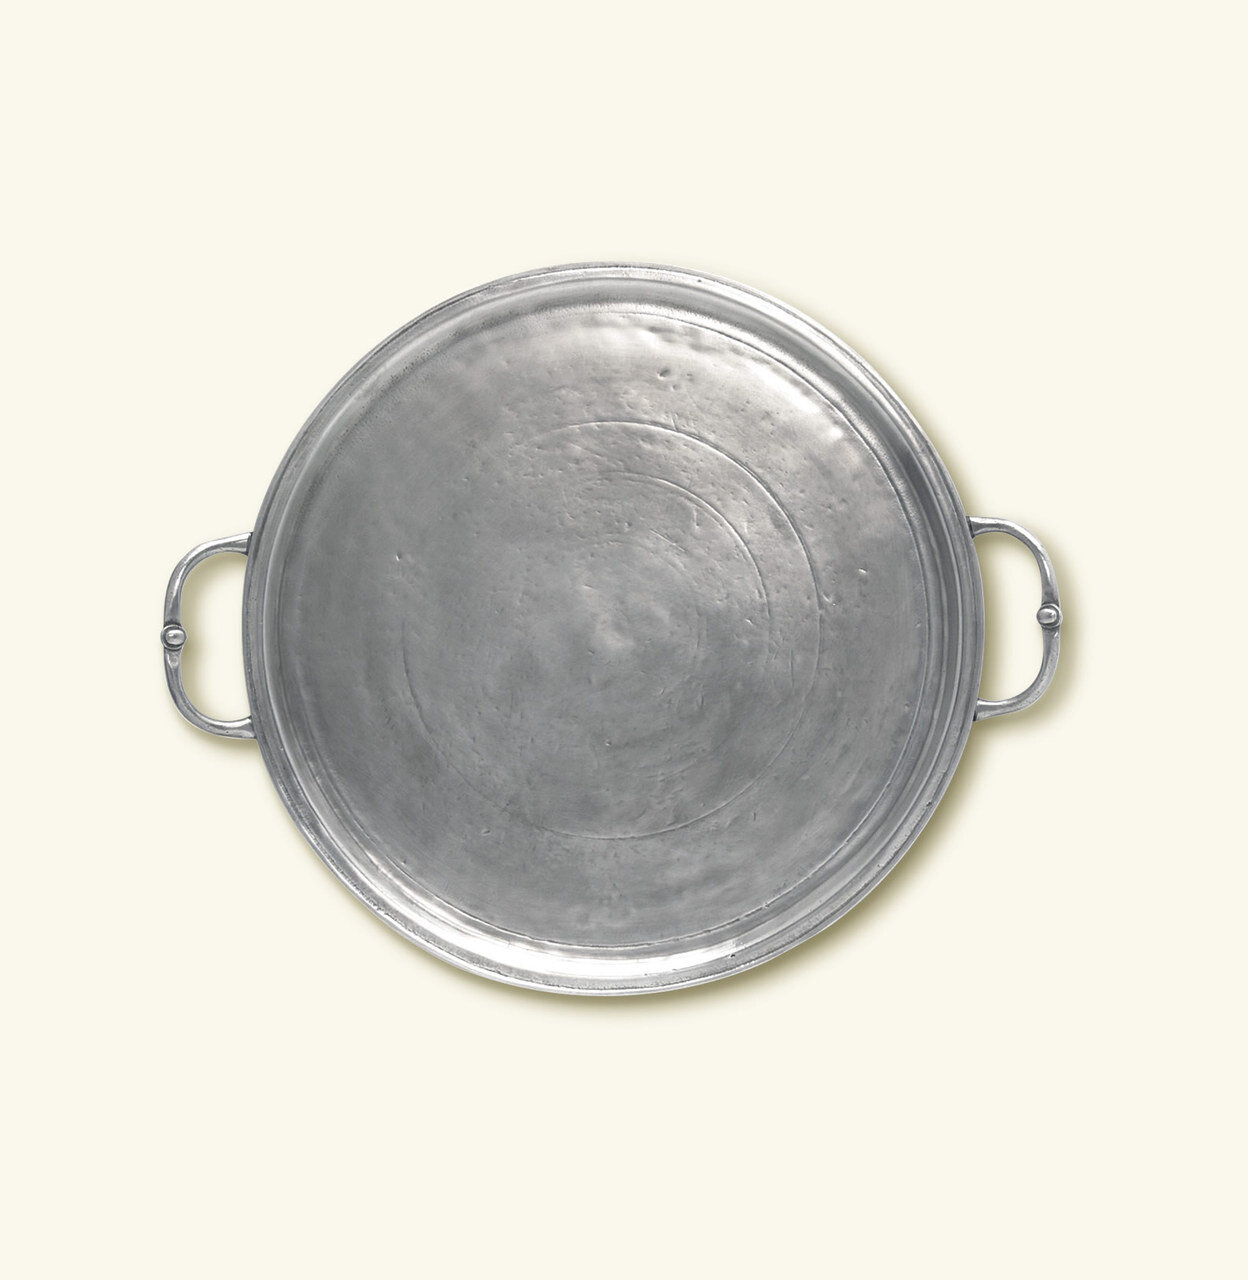 Match Pewter Round Tray With Handles Small a359.0